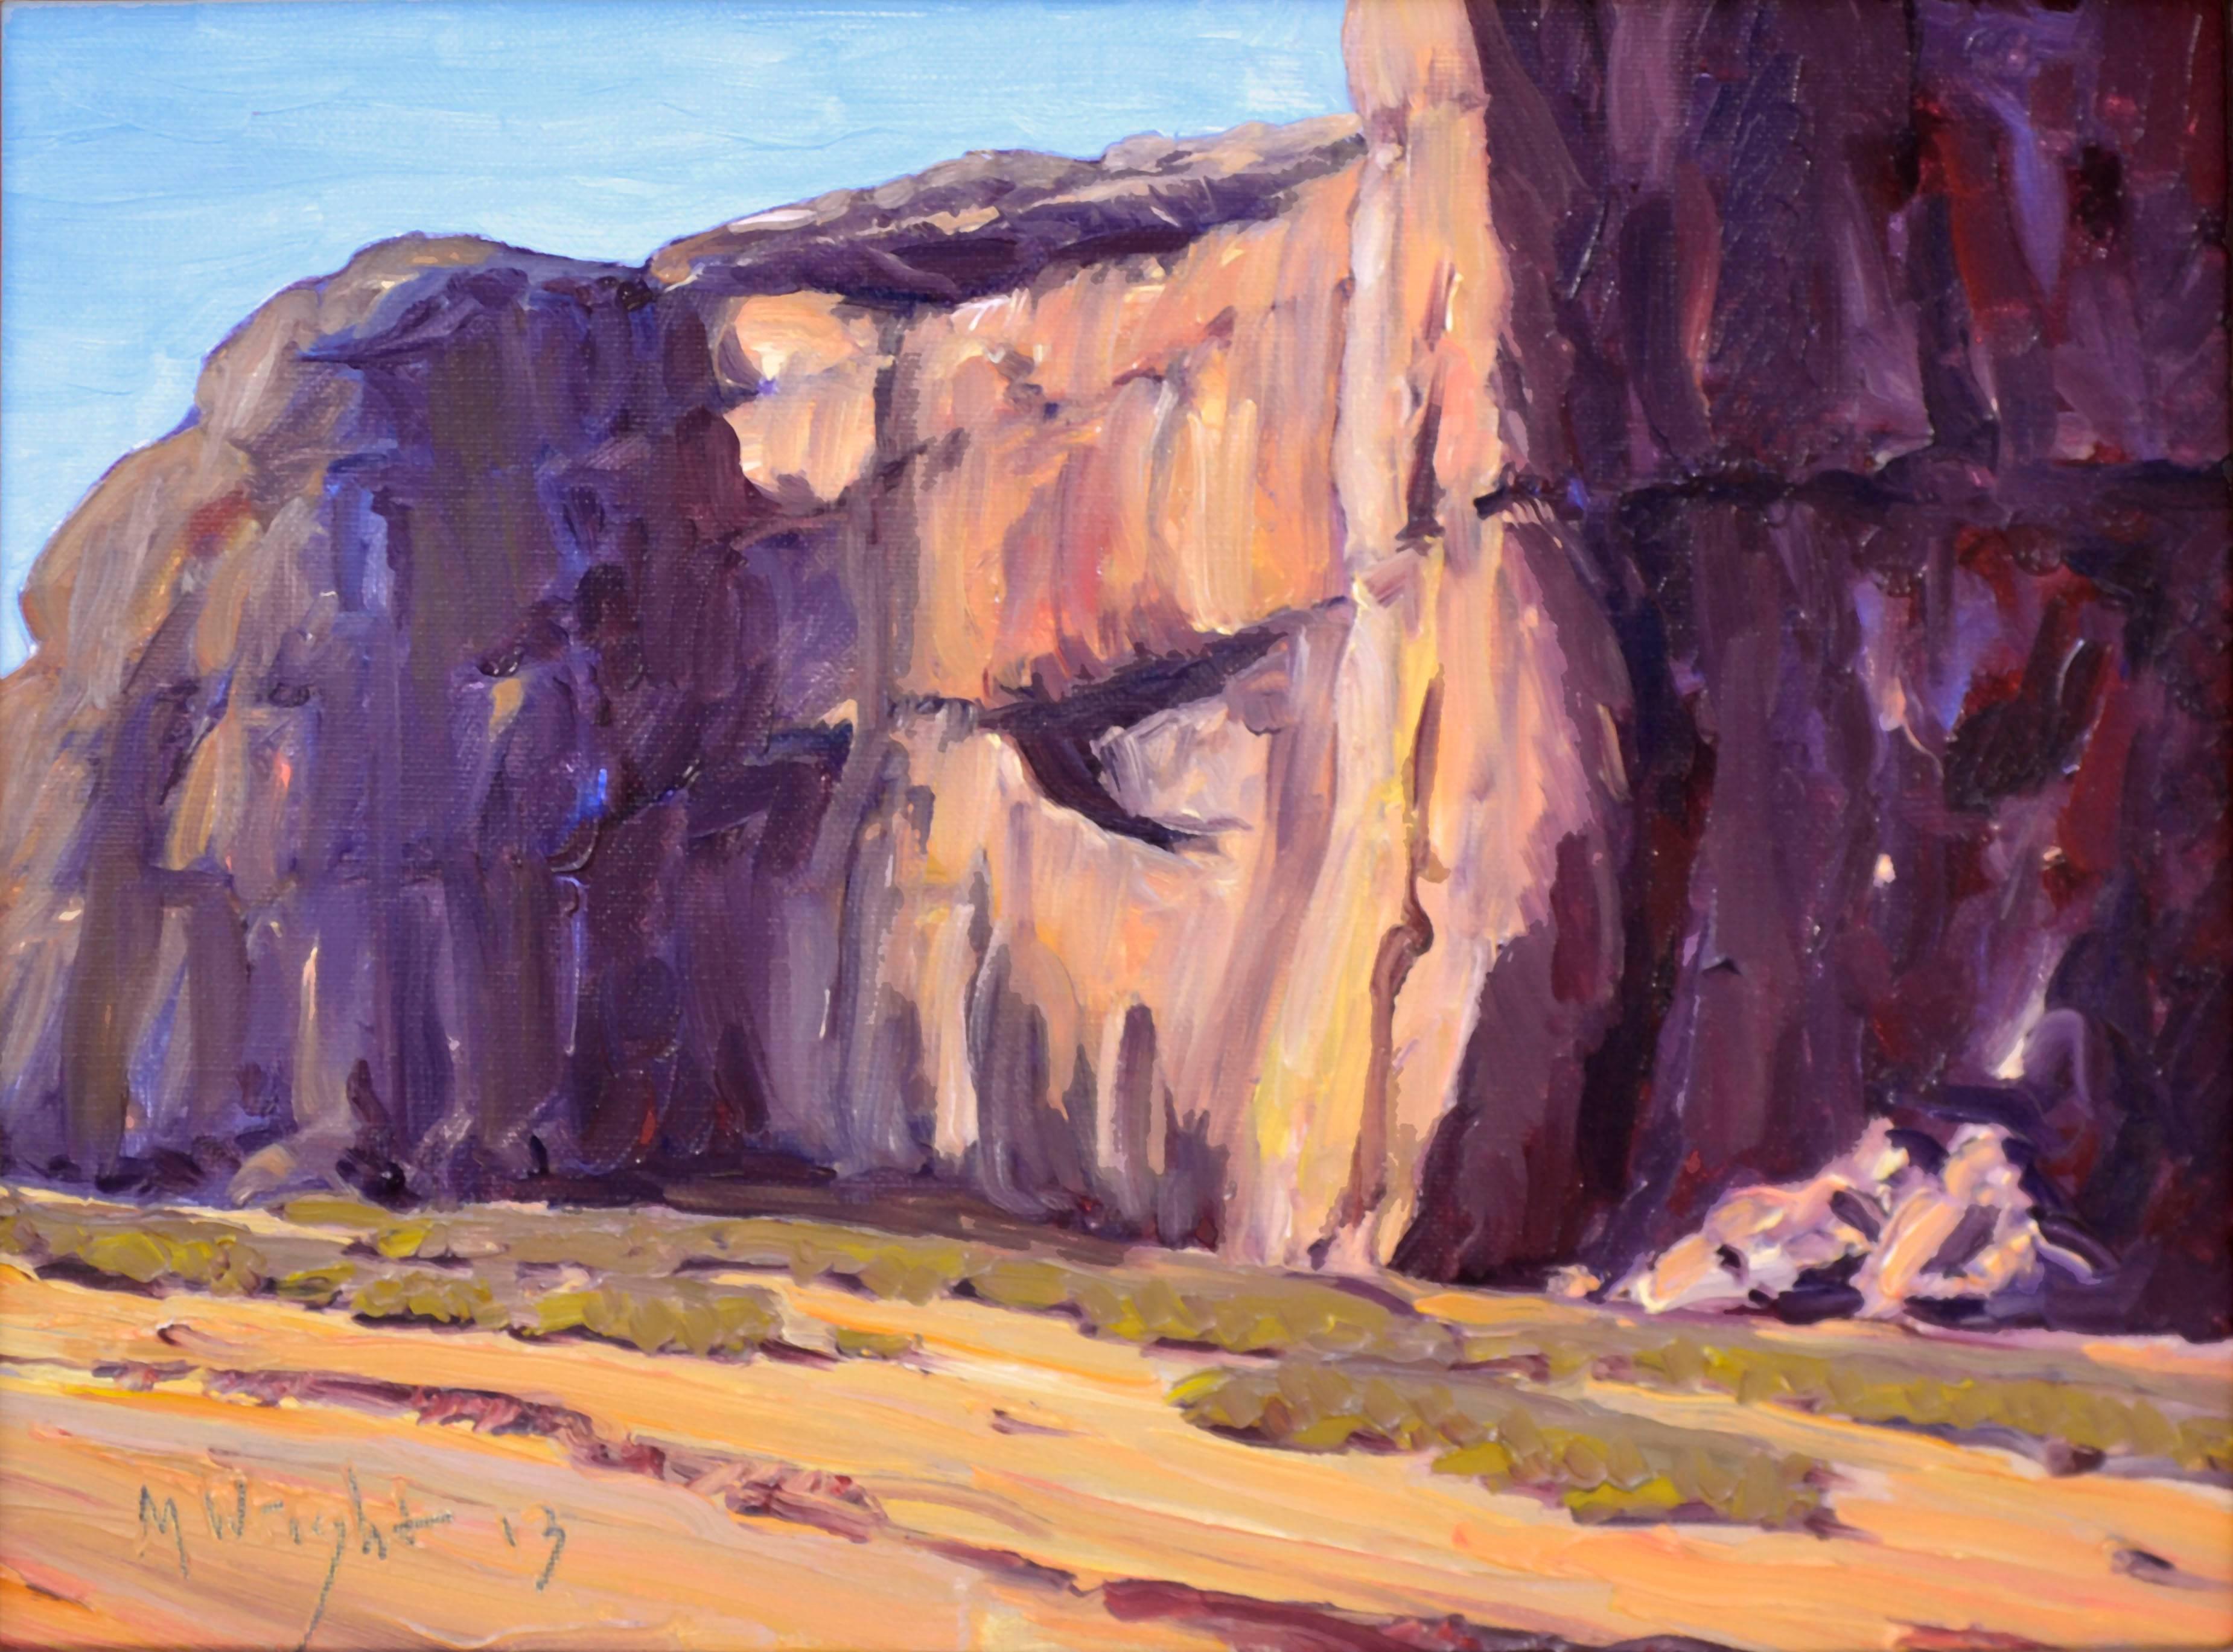 Utah Desert Landscape -- Capitol Reef National Park - Painting by Mike Wright